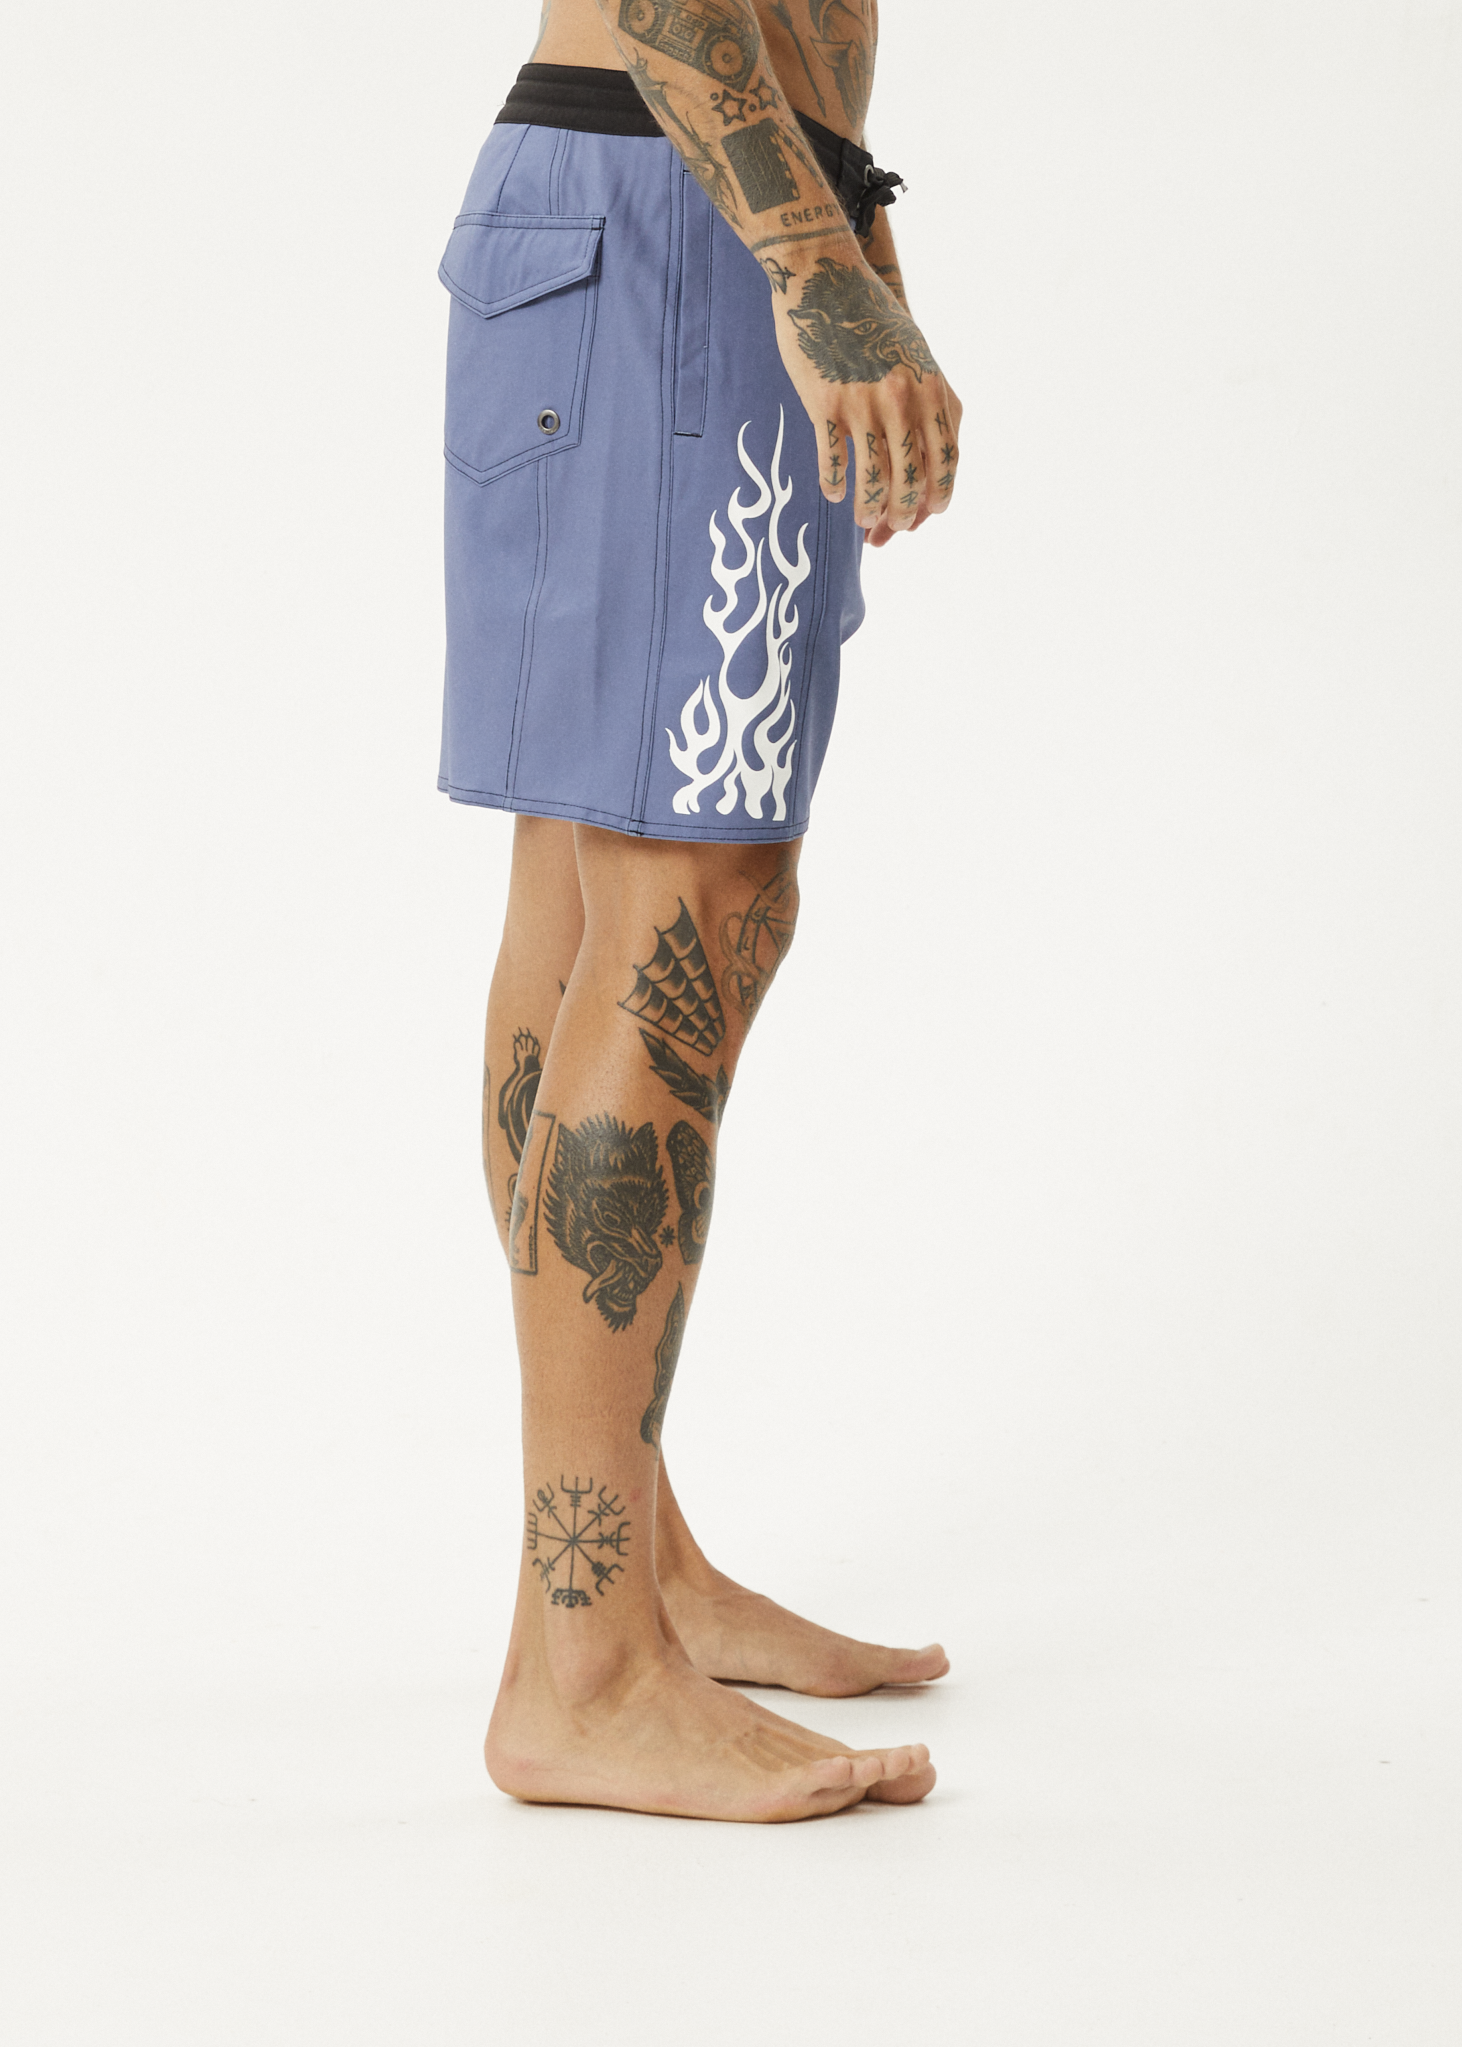 AFENDS Scorched surf related boardshorts 18 inch - Marlin